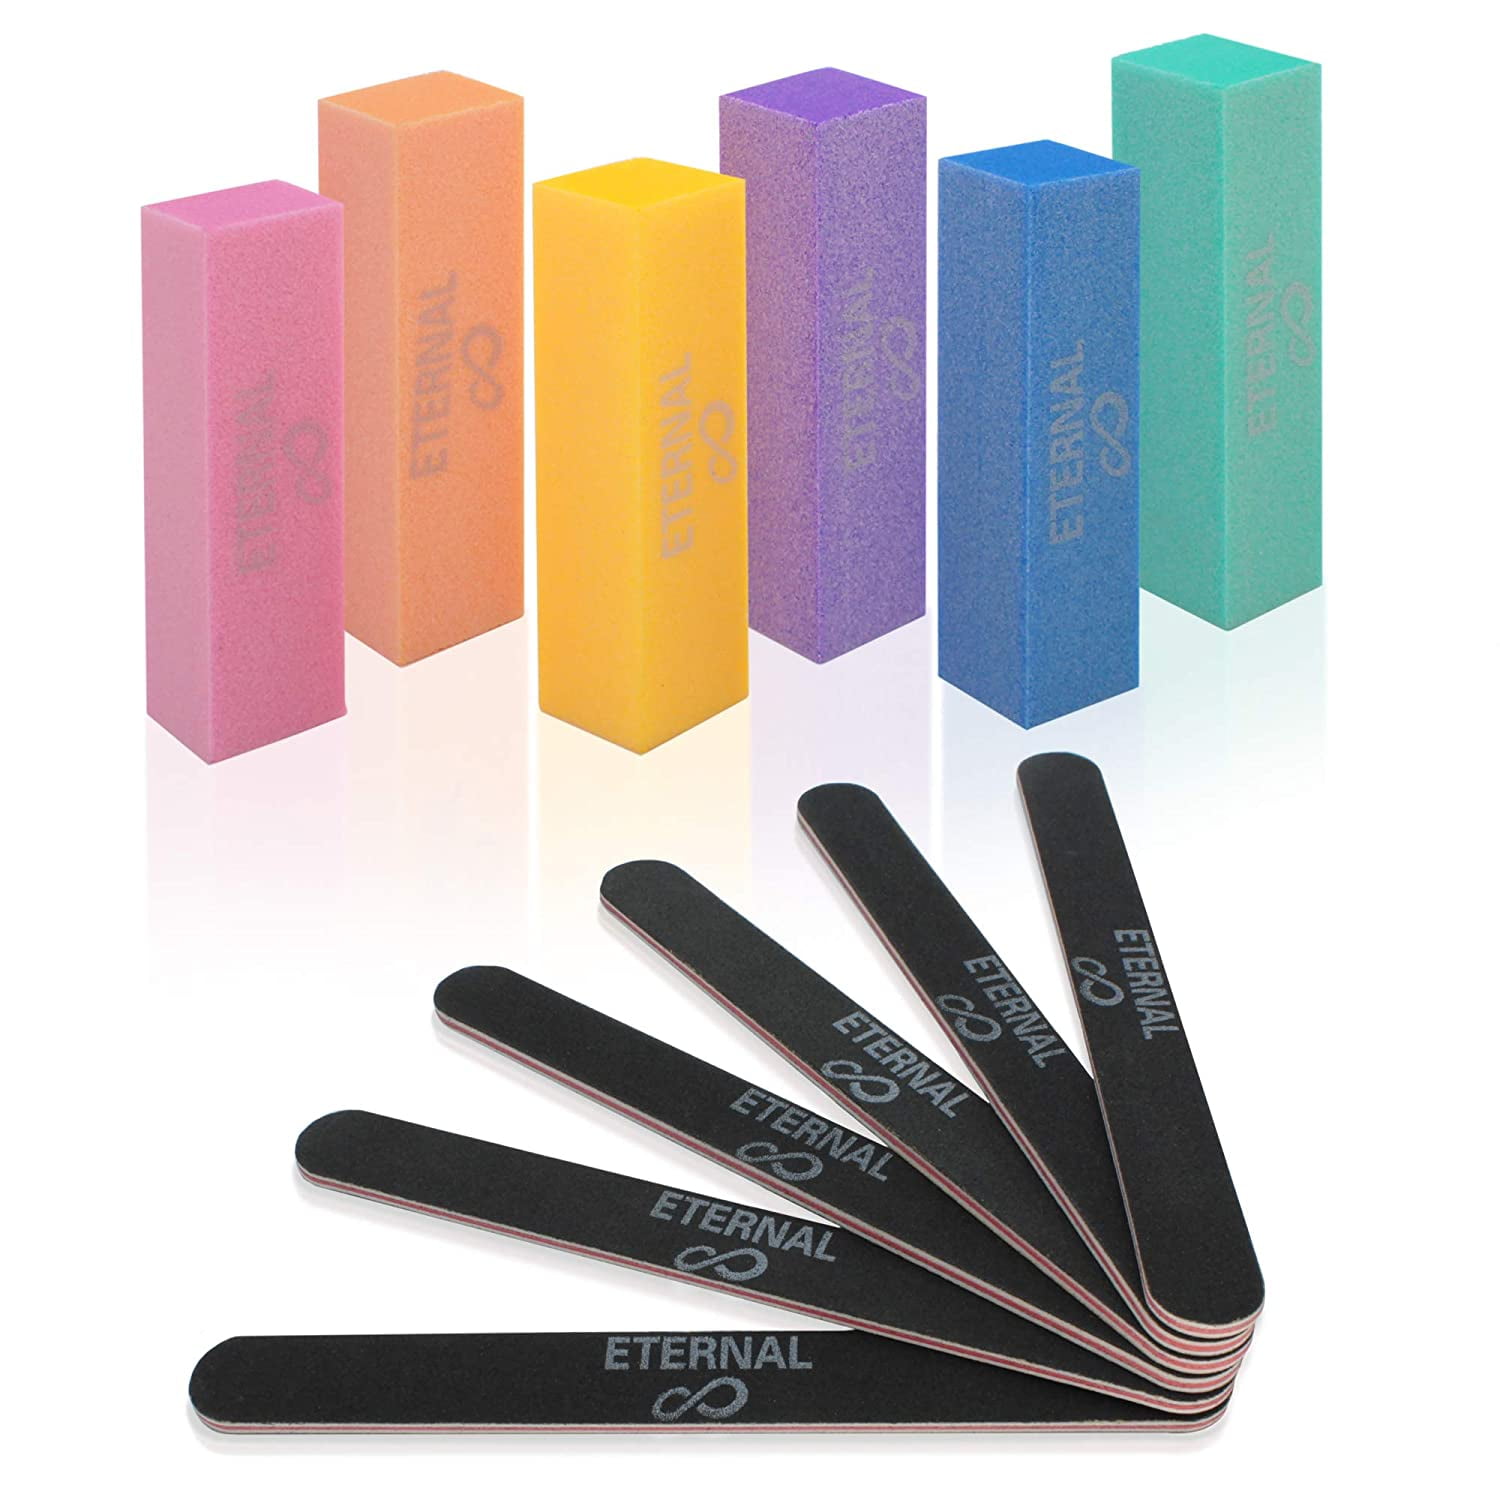 Eternal Cosmetics Kit of 6 Nail Files and 6 Buffer Blocks for Manicure ...